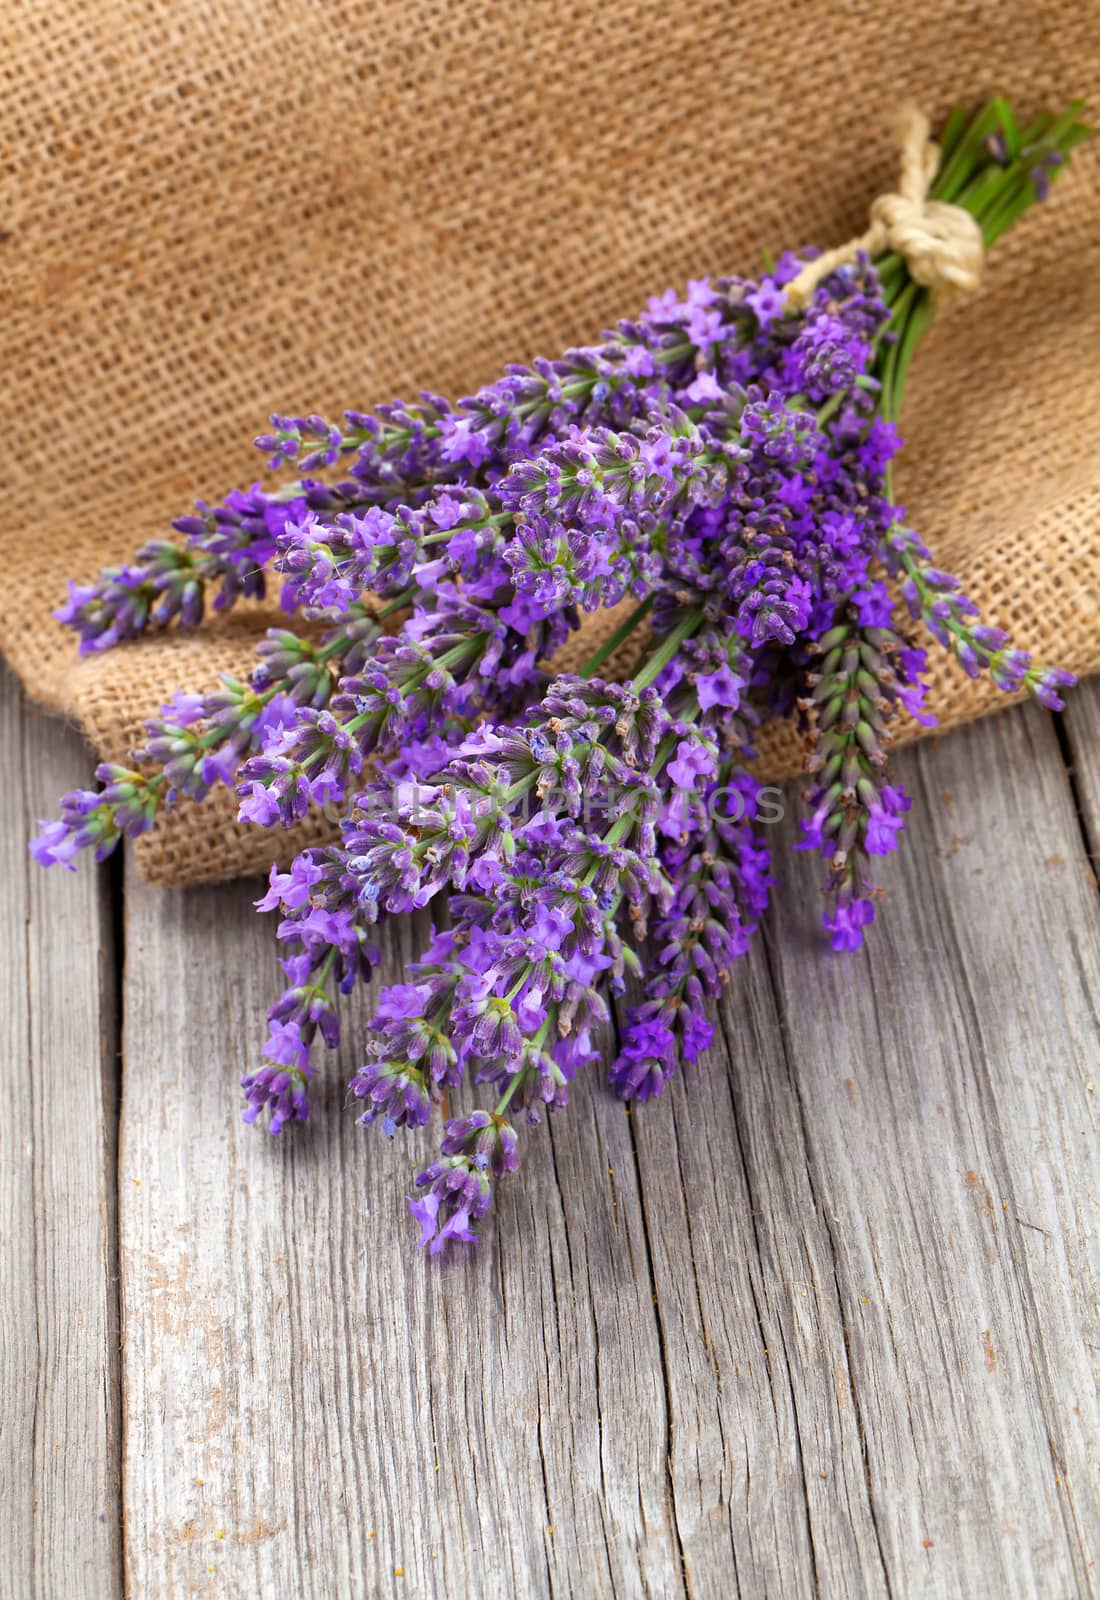 lavender flowers in a basket with burlap on the wooden background